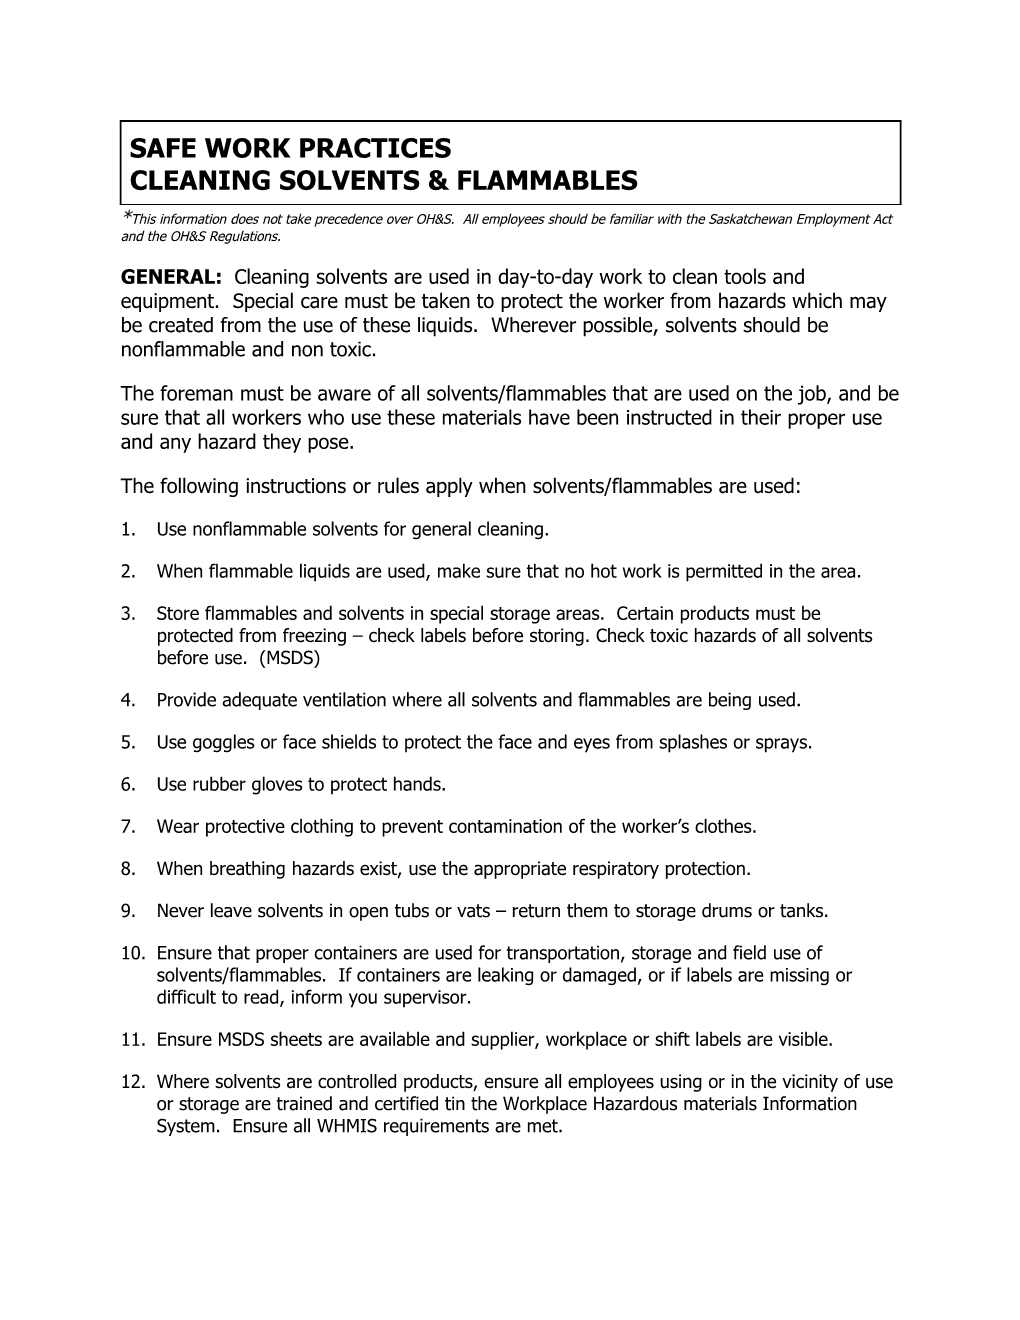 The Following Instructions Or Rules Apply When Solvents/Flammables Are Used